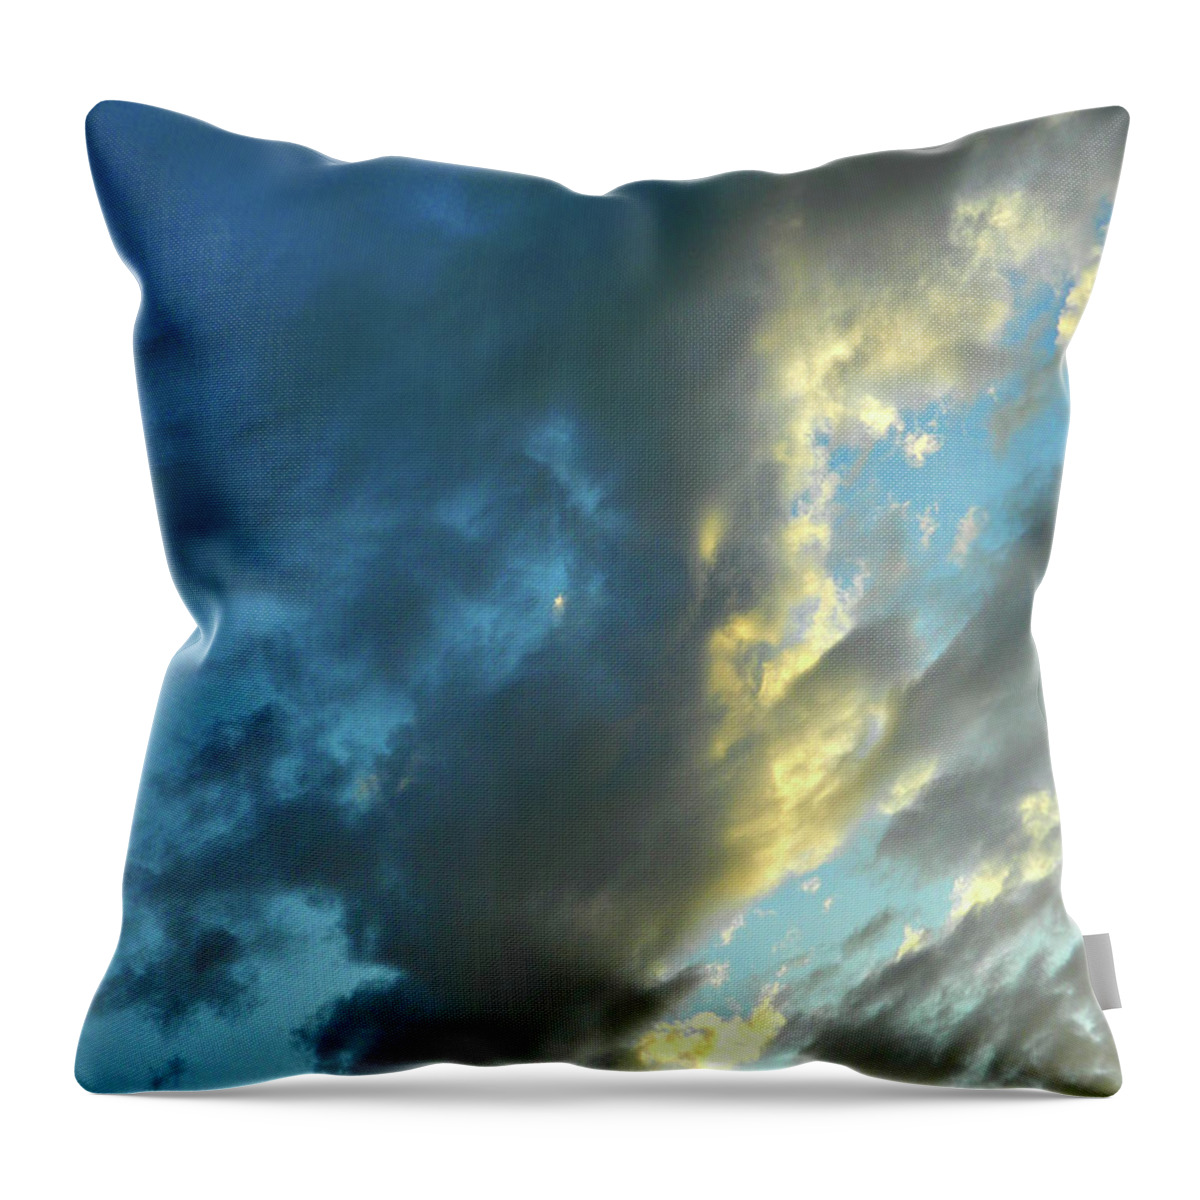 Cloudy Summer Skies Throw Pillow featuring the photograph Cloudy Summer Skies 2 by Cyryn Fyrcyd